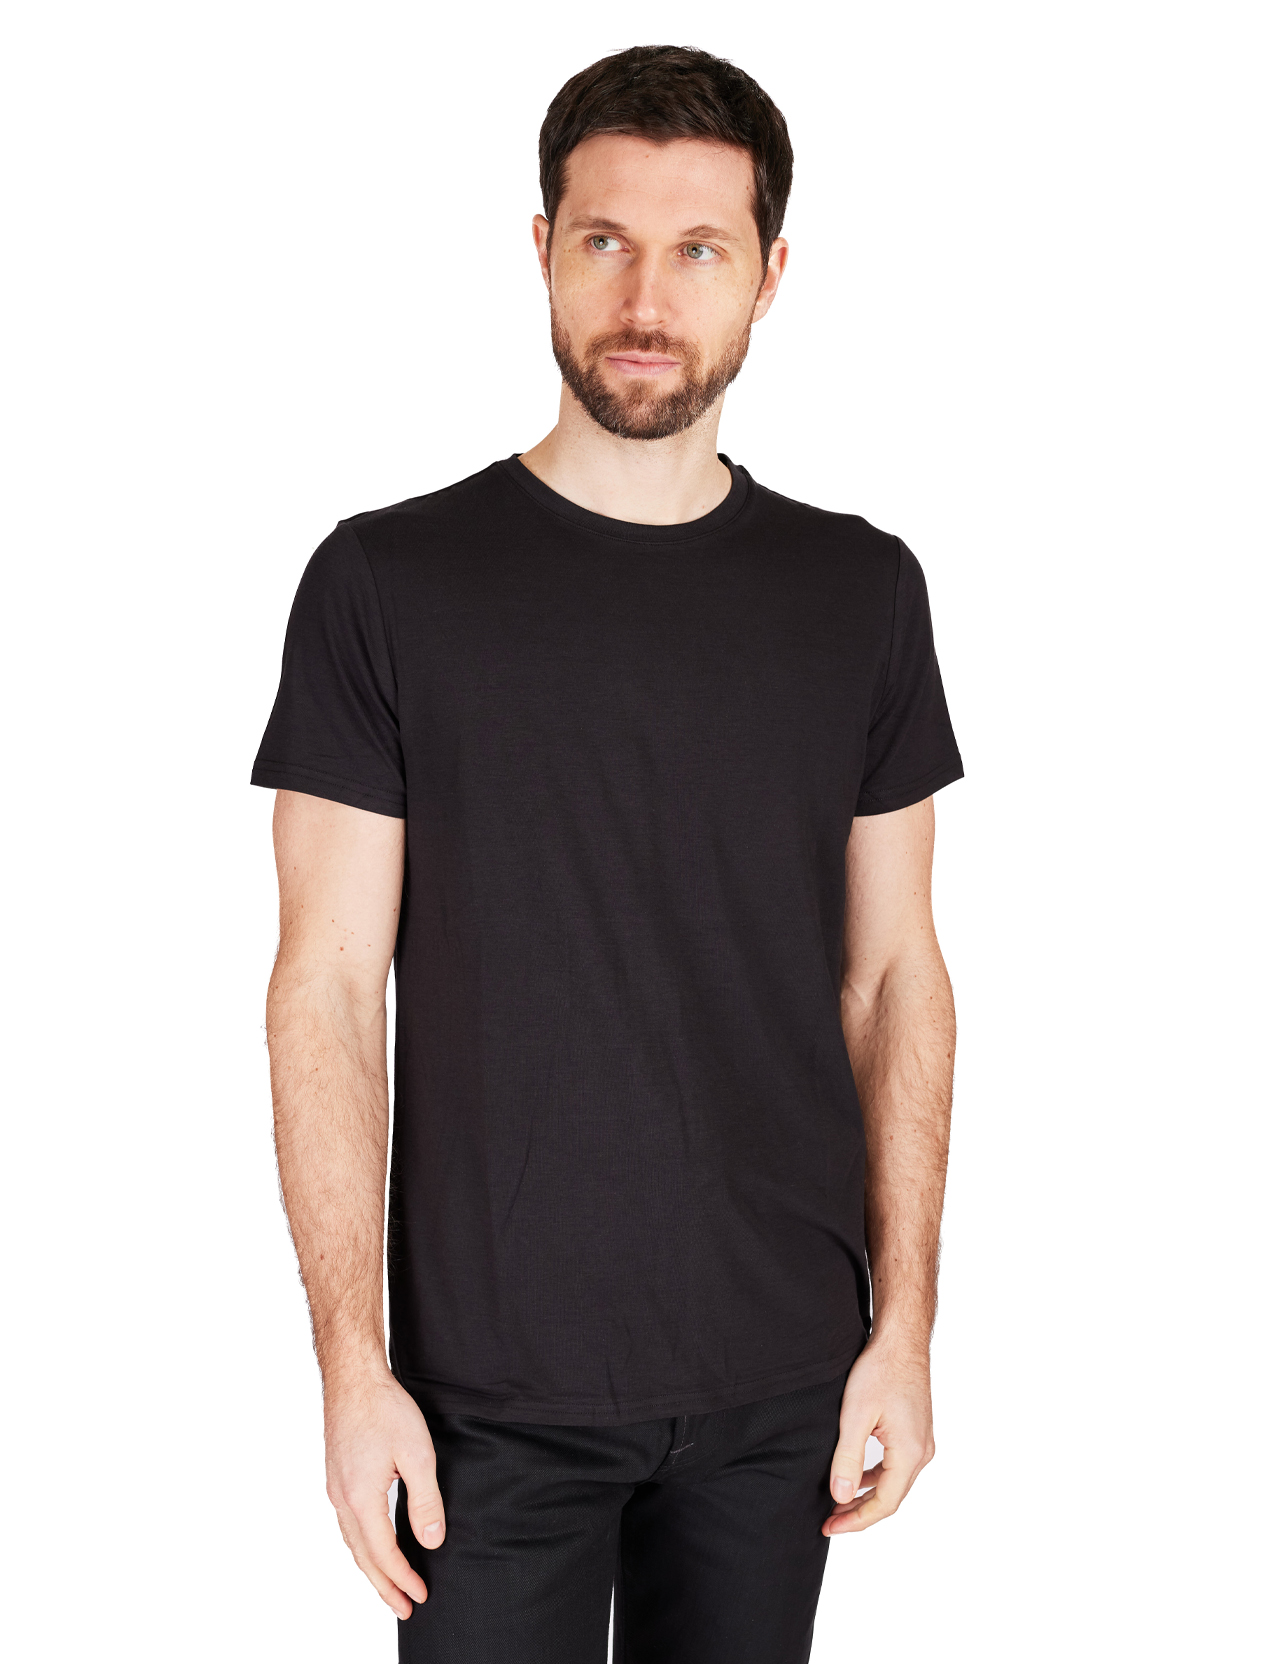 Resterods---Jimmy-Tee-Bamboo-T-Shirt---Black1